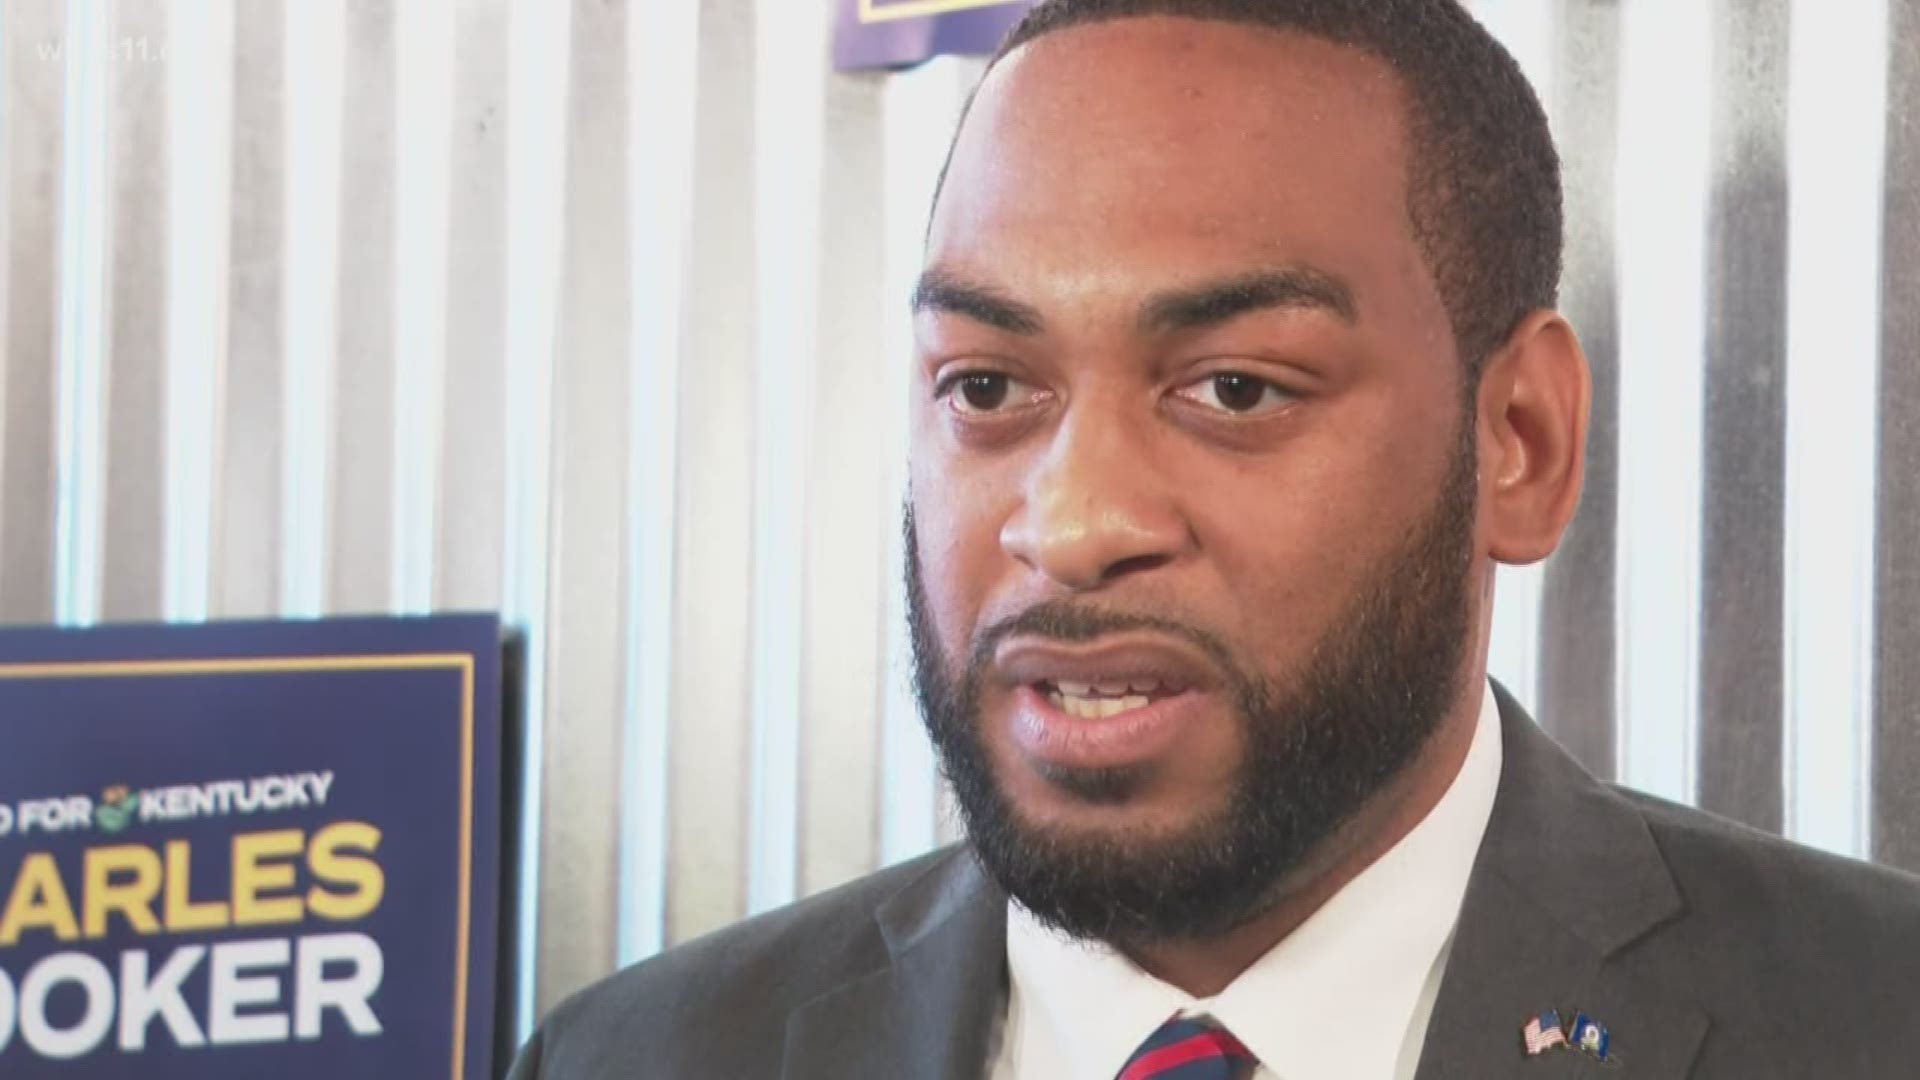 State Rep. Charles Booker announced his decision to seek the Democratic nomination to challenge Senator Mitch McConnell.